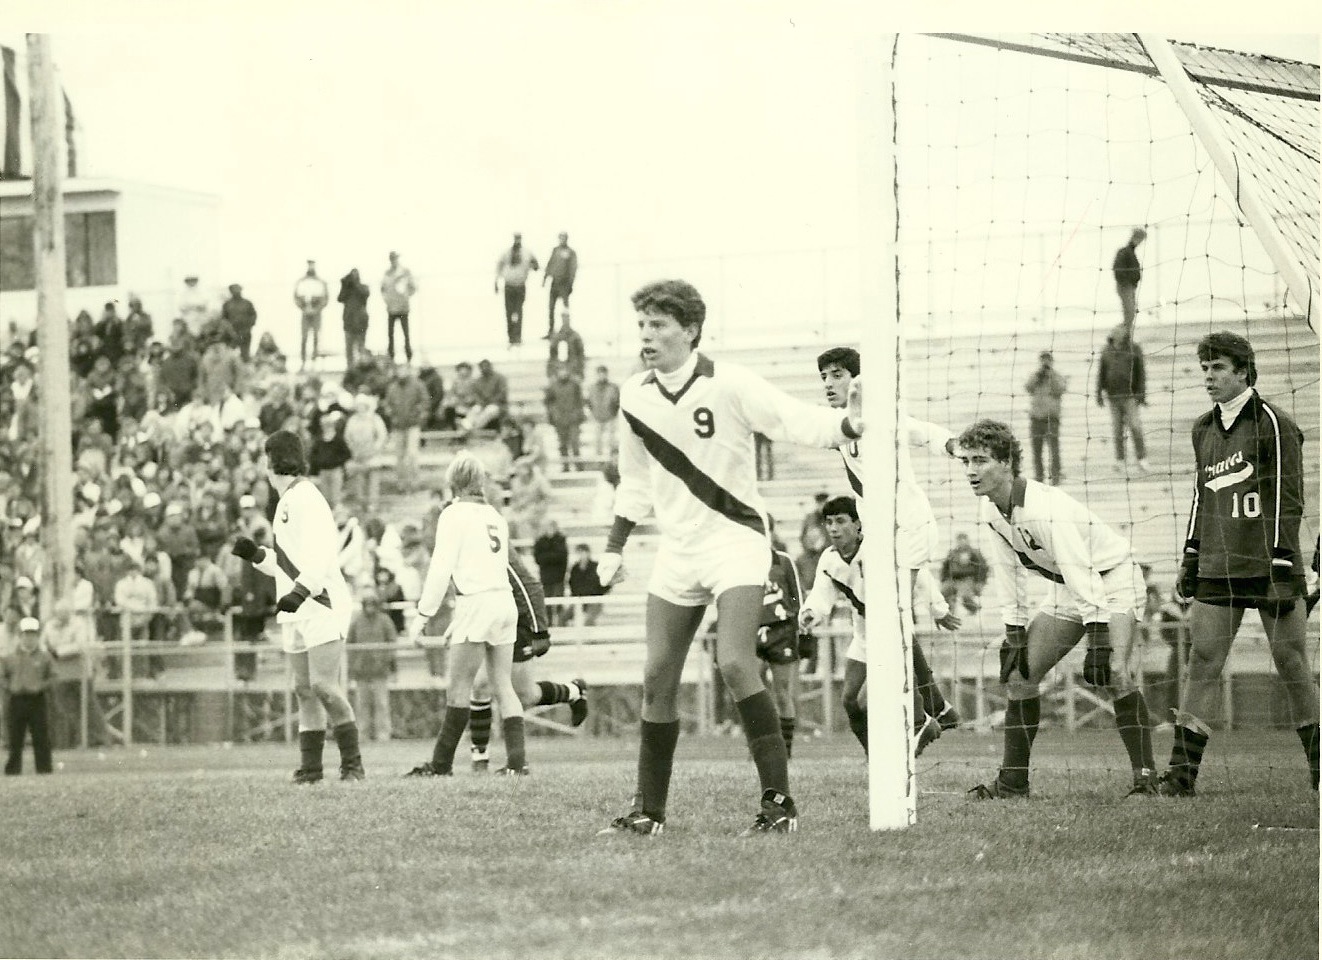  Joe Ciaciura (9) guards the goal in the 1986 State Championship game 